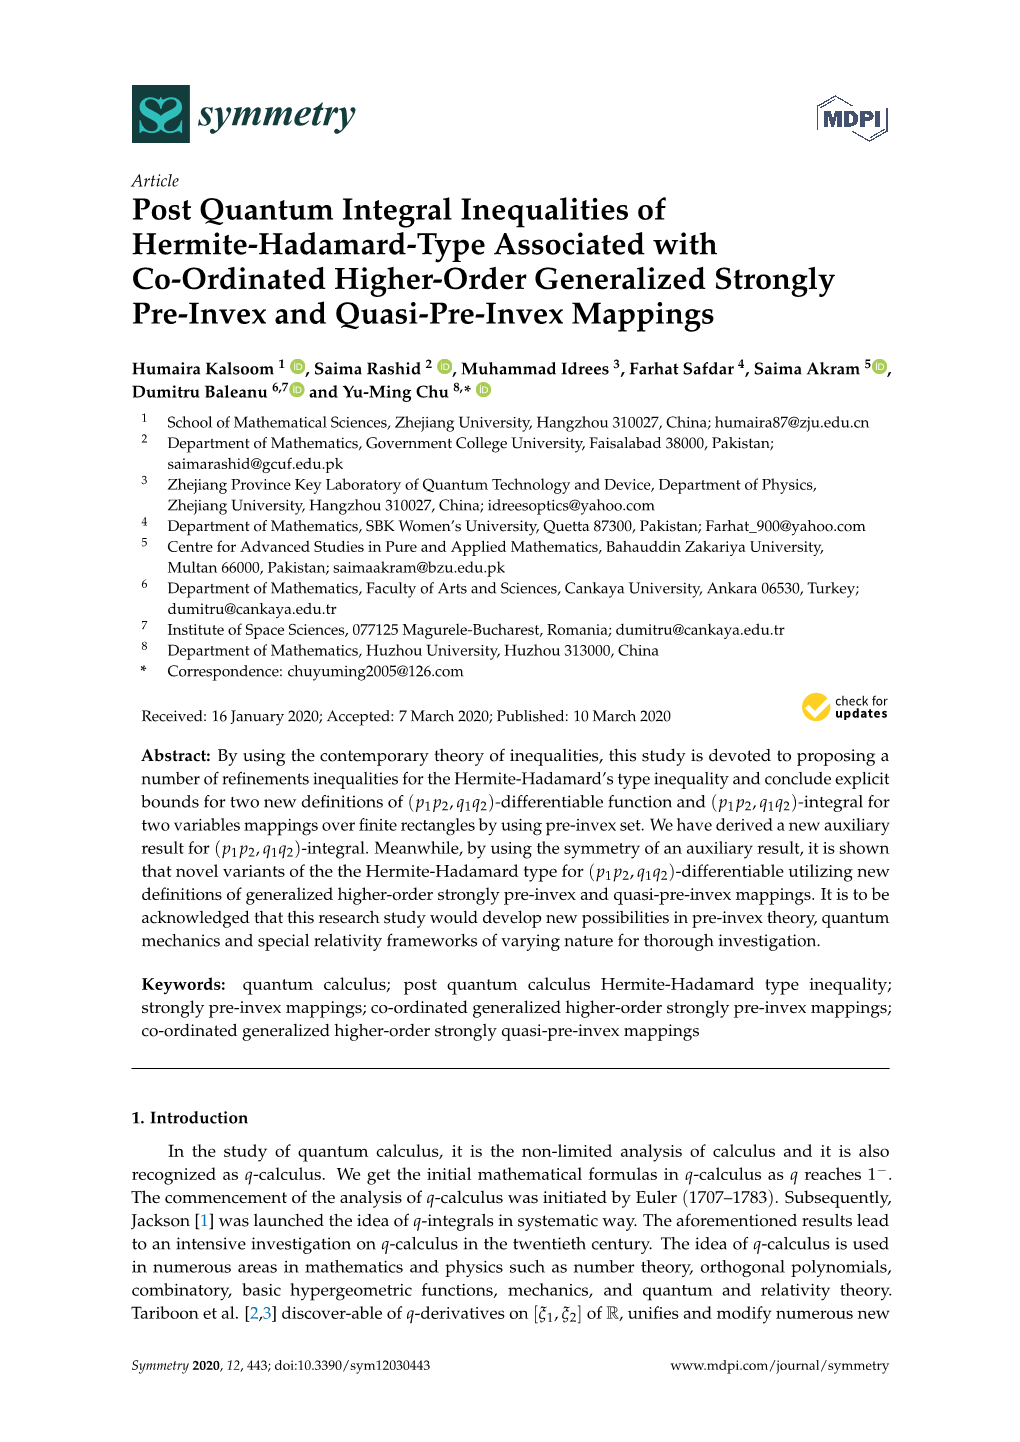 Post Quantum Integral Inequalities of Hermite-Hadamard-Type Associated with Co-Ordinated Higher-Order Generalized Strongly Pre-Invex and Quasi-Pre-Invex Mappings